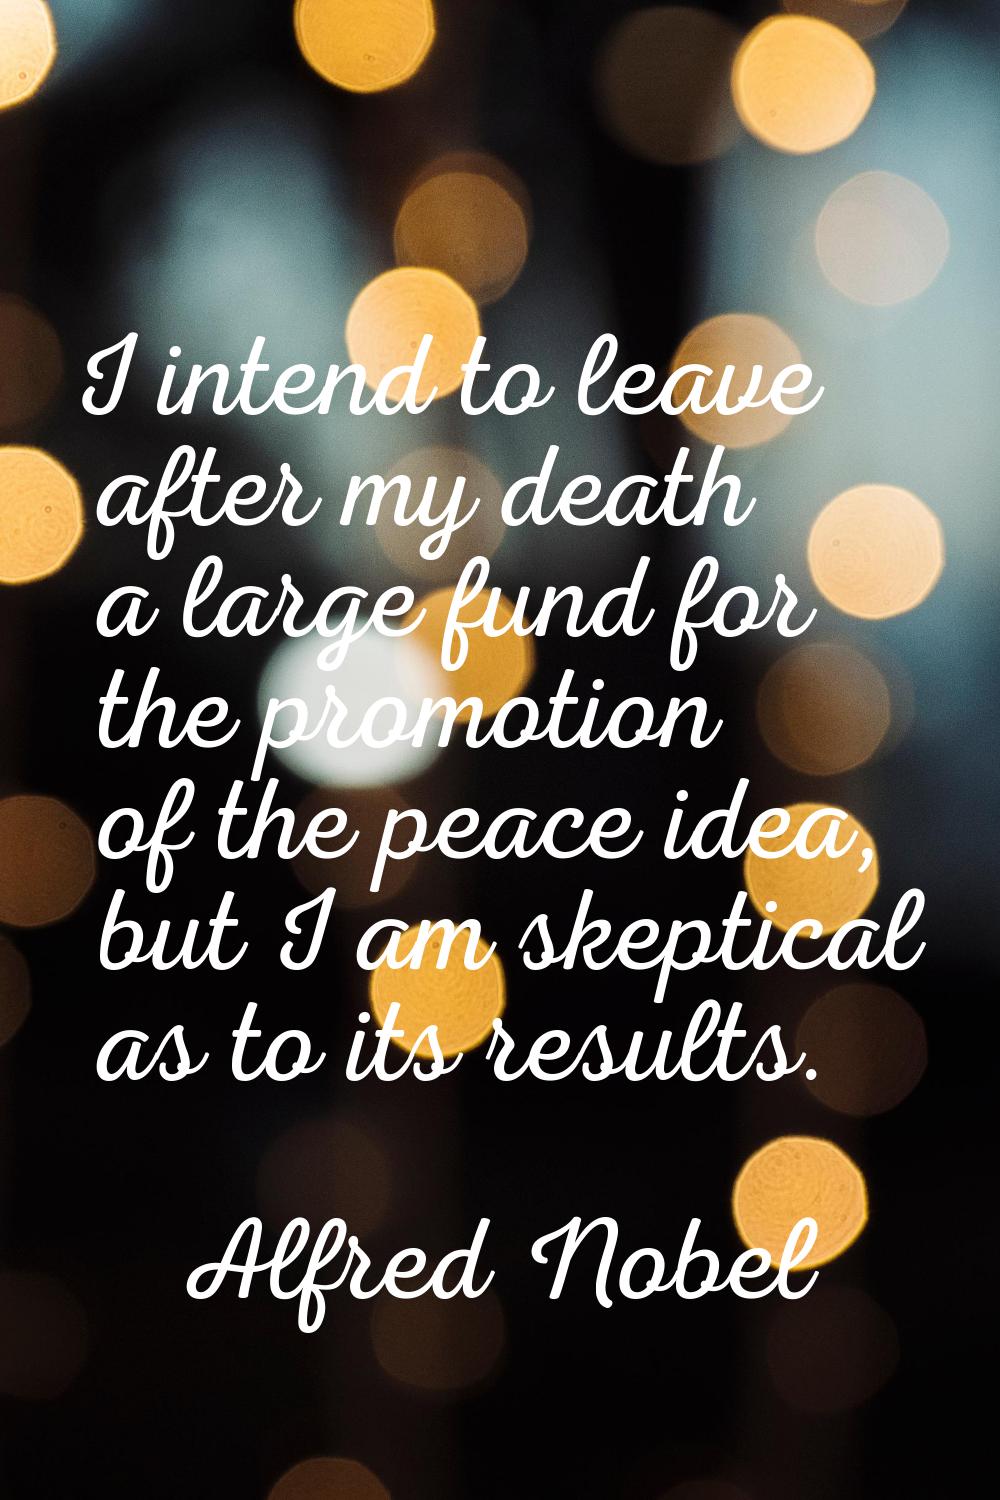 I intend to leave after my death a large fund for the promotion of the peace idea, but I am skeptic